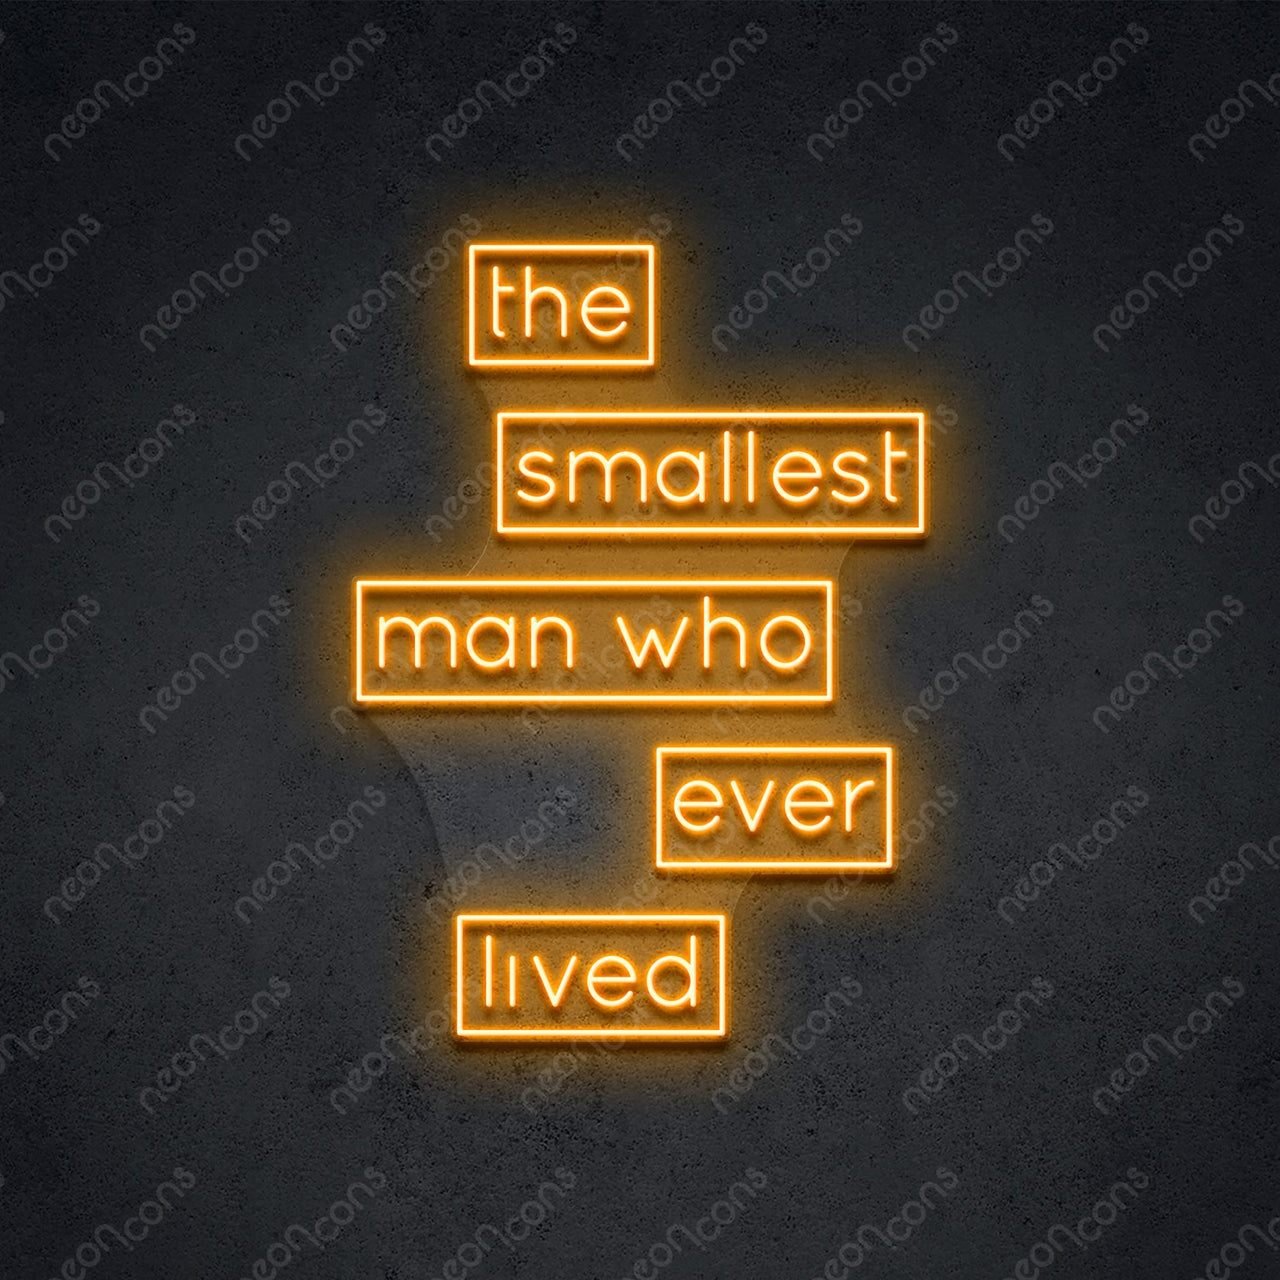 "The Smallest Man" Neon Sign 60cm (2ft) / Orange / LED Neon by Neon Icons